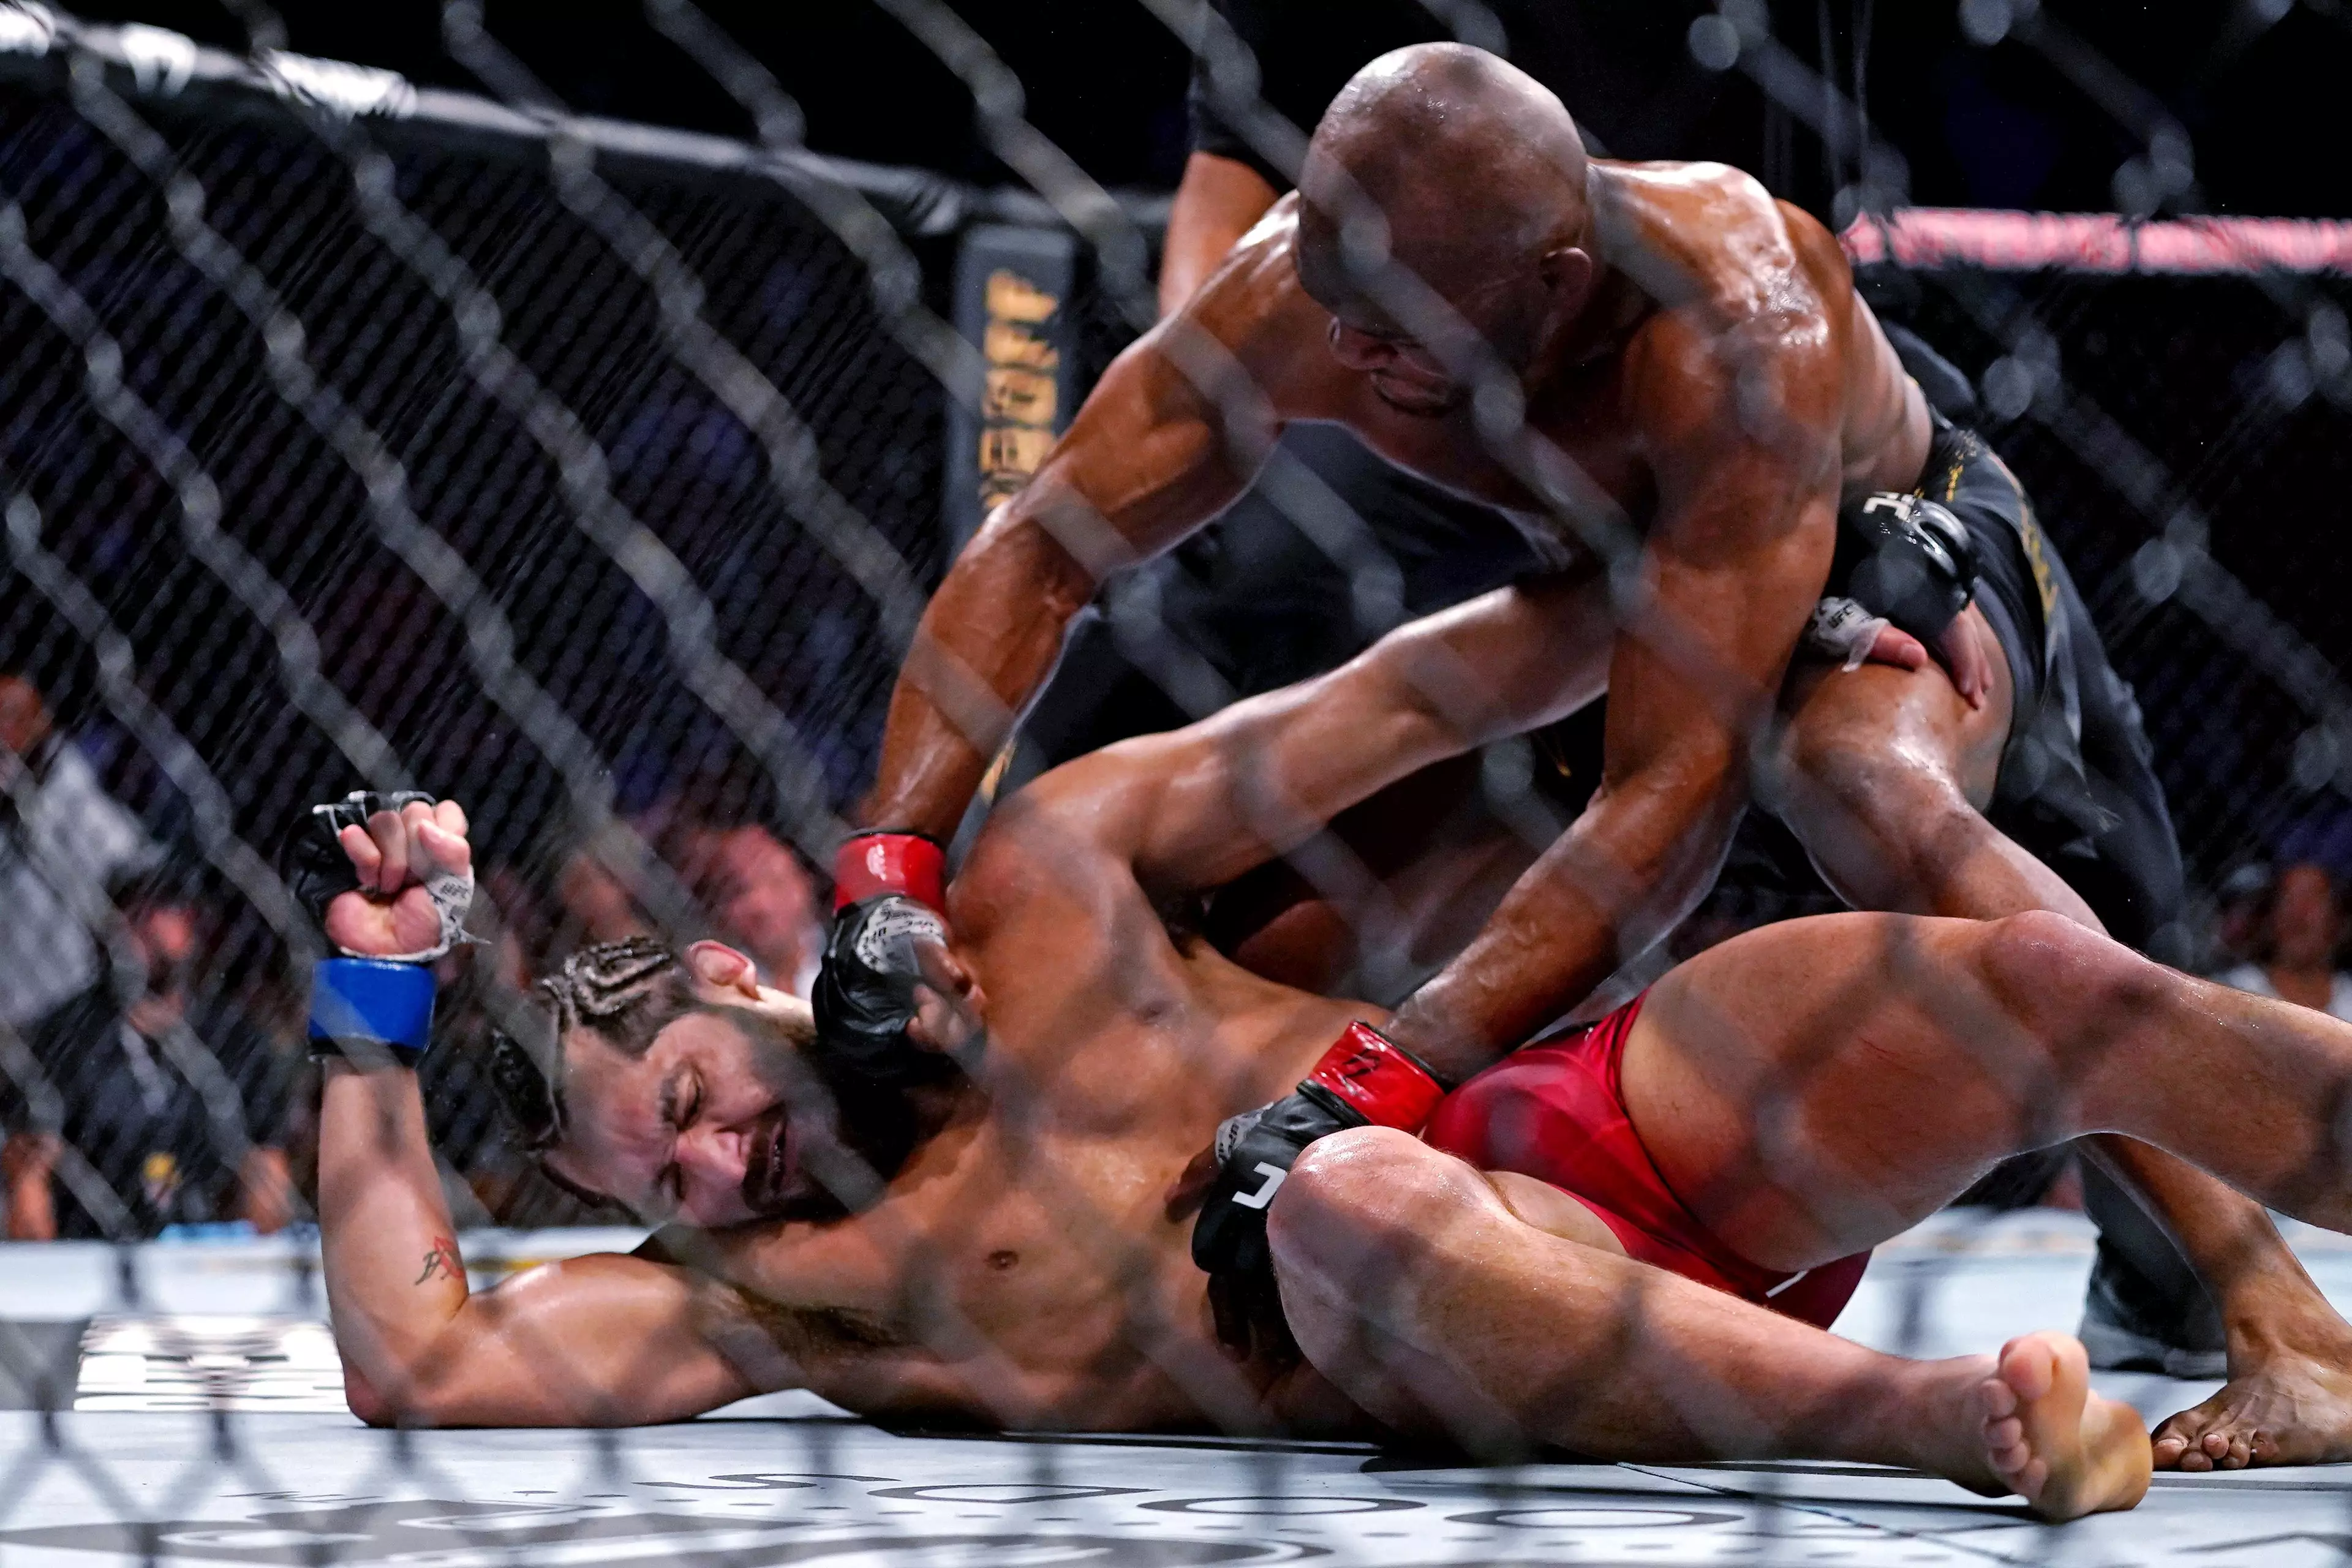 Masvidal was stopped by Kamaru Usman in his most recent fight. Image: PA Images